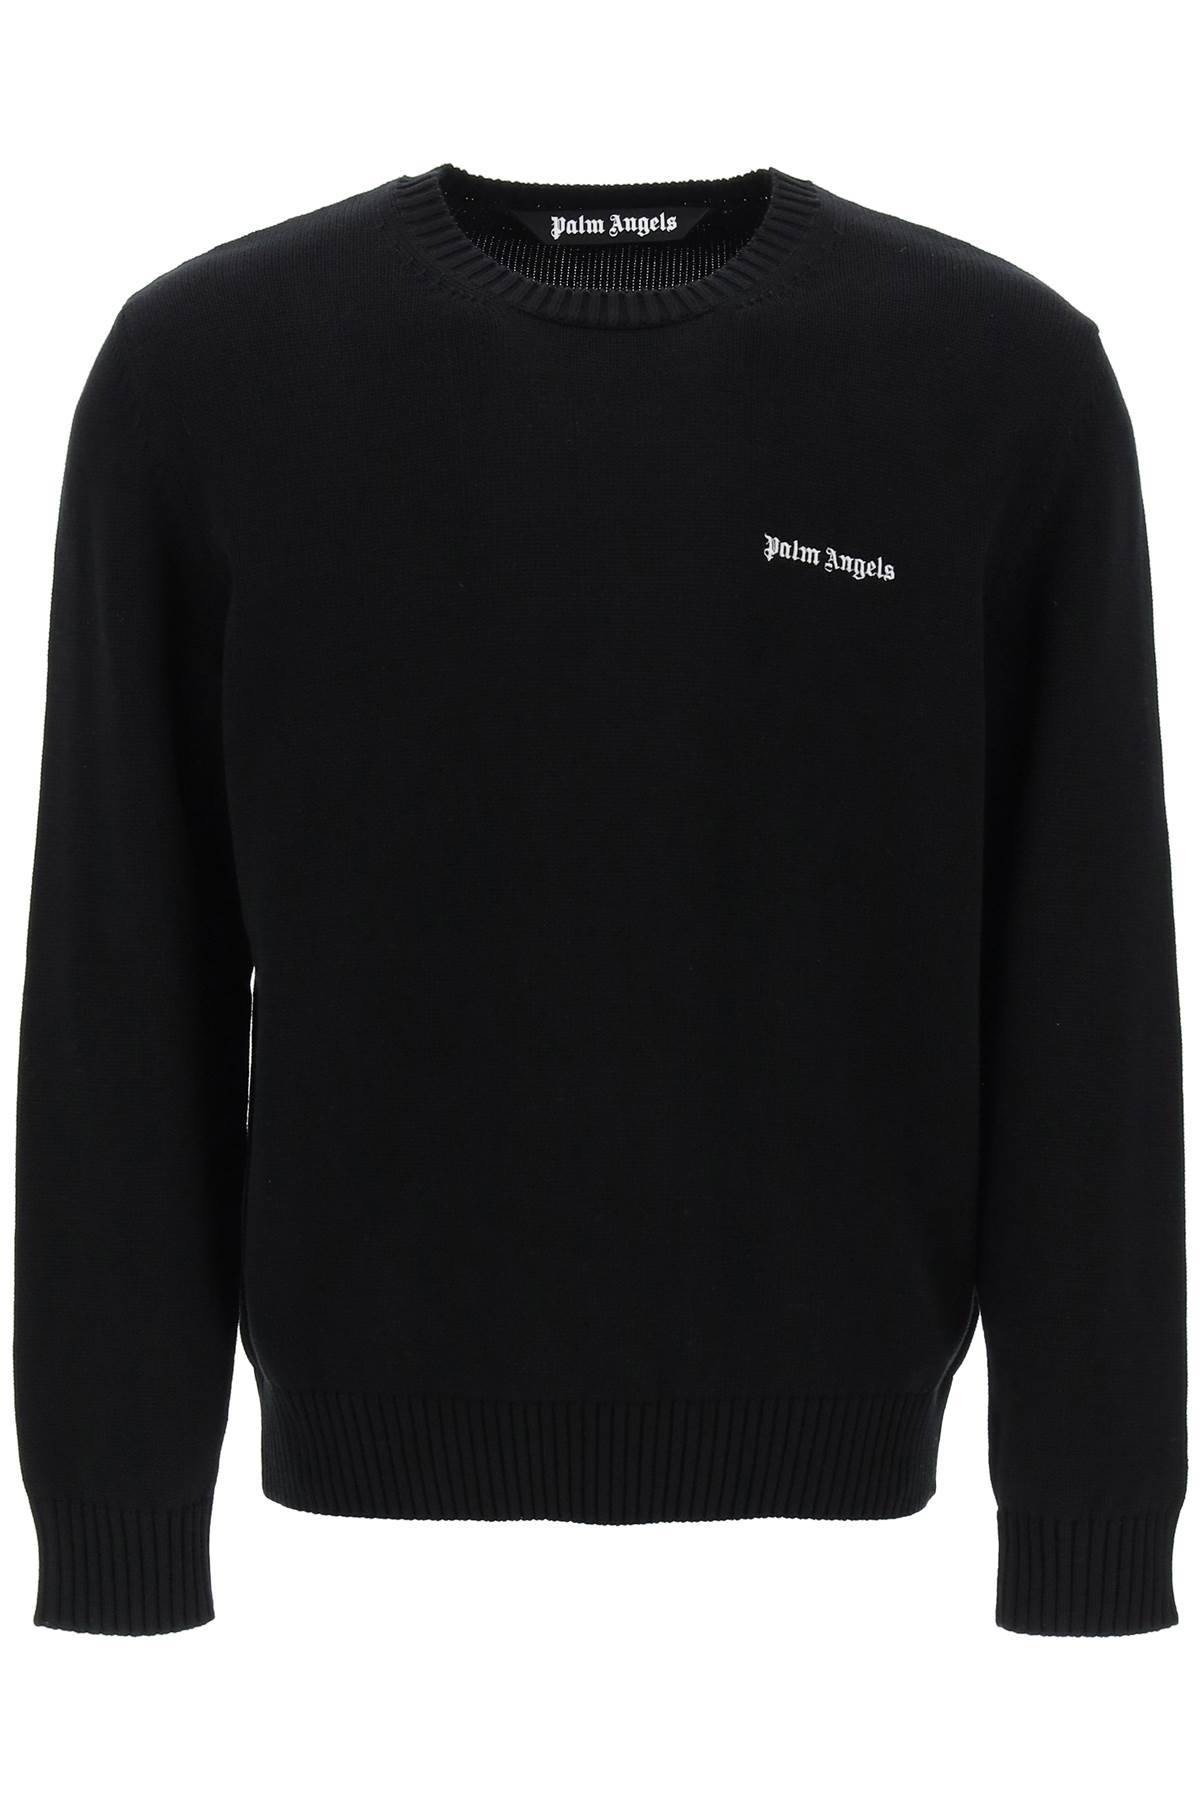 PALM ANGELS PALM ANGELS embroidered logo pullover